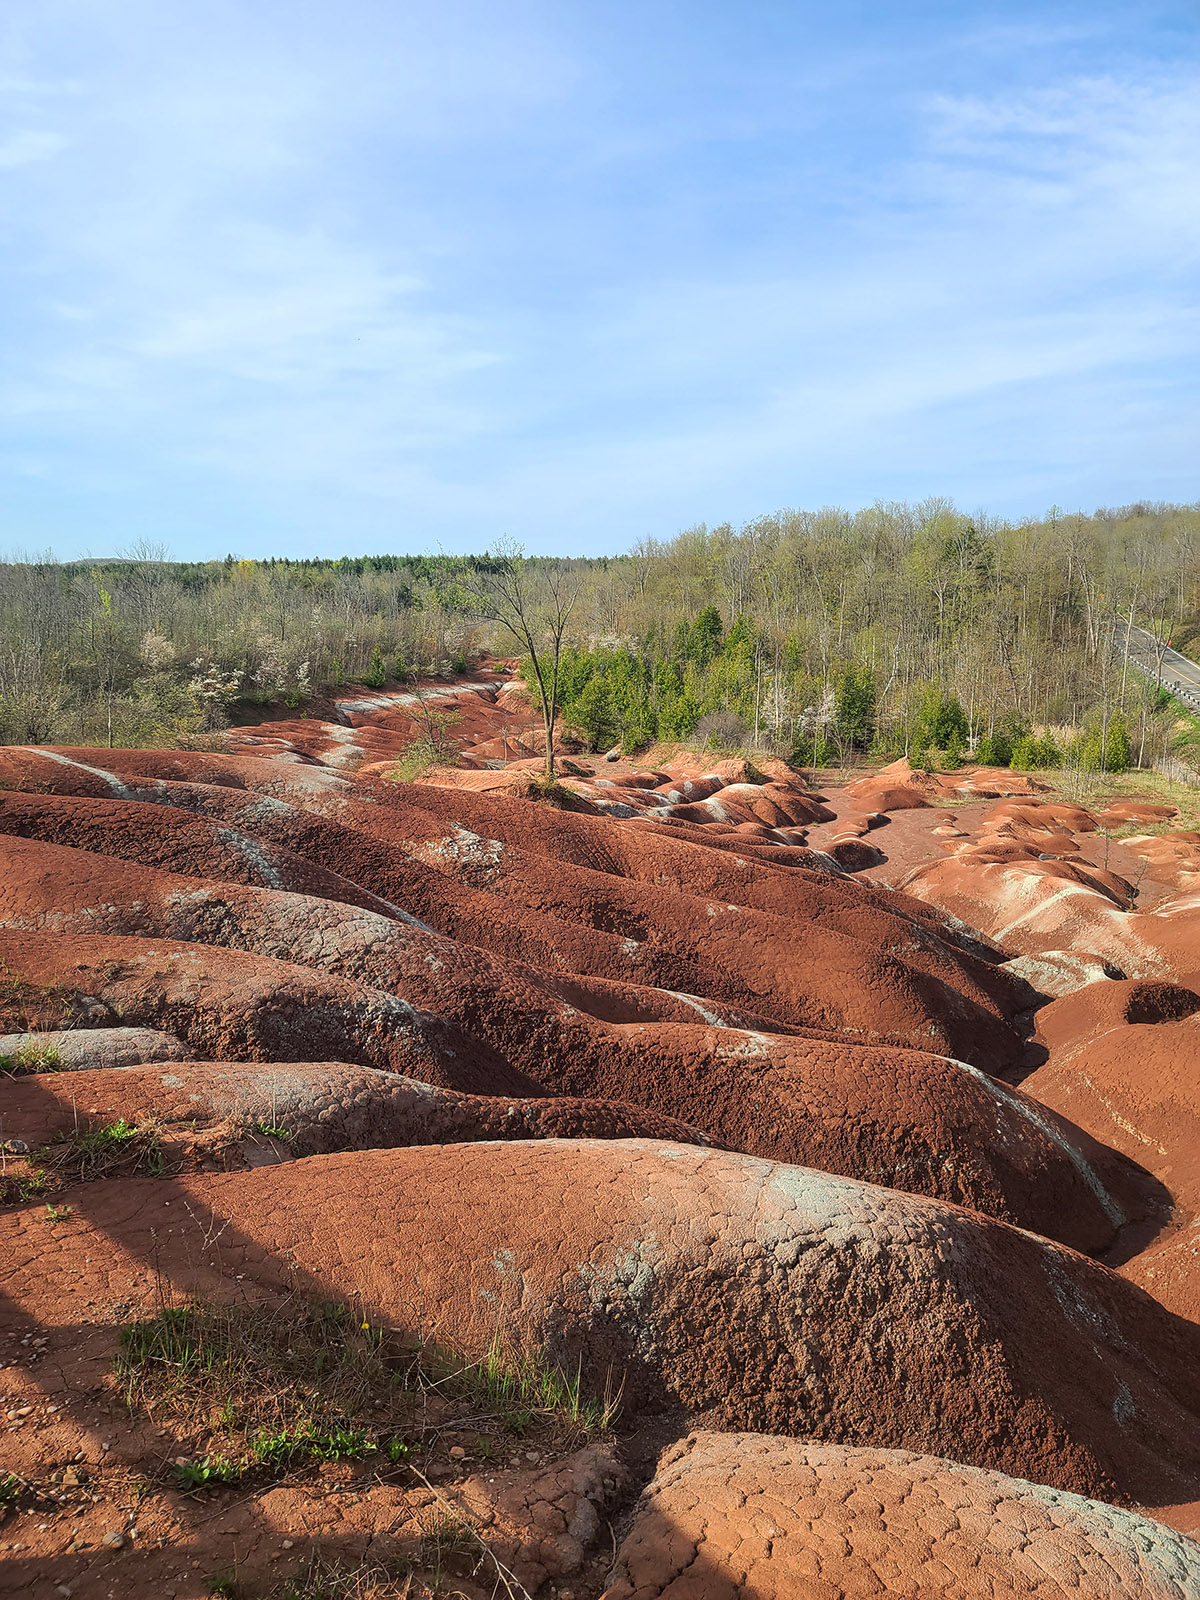 Red shale formations at the Cheltenham Badlands.